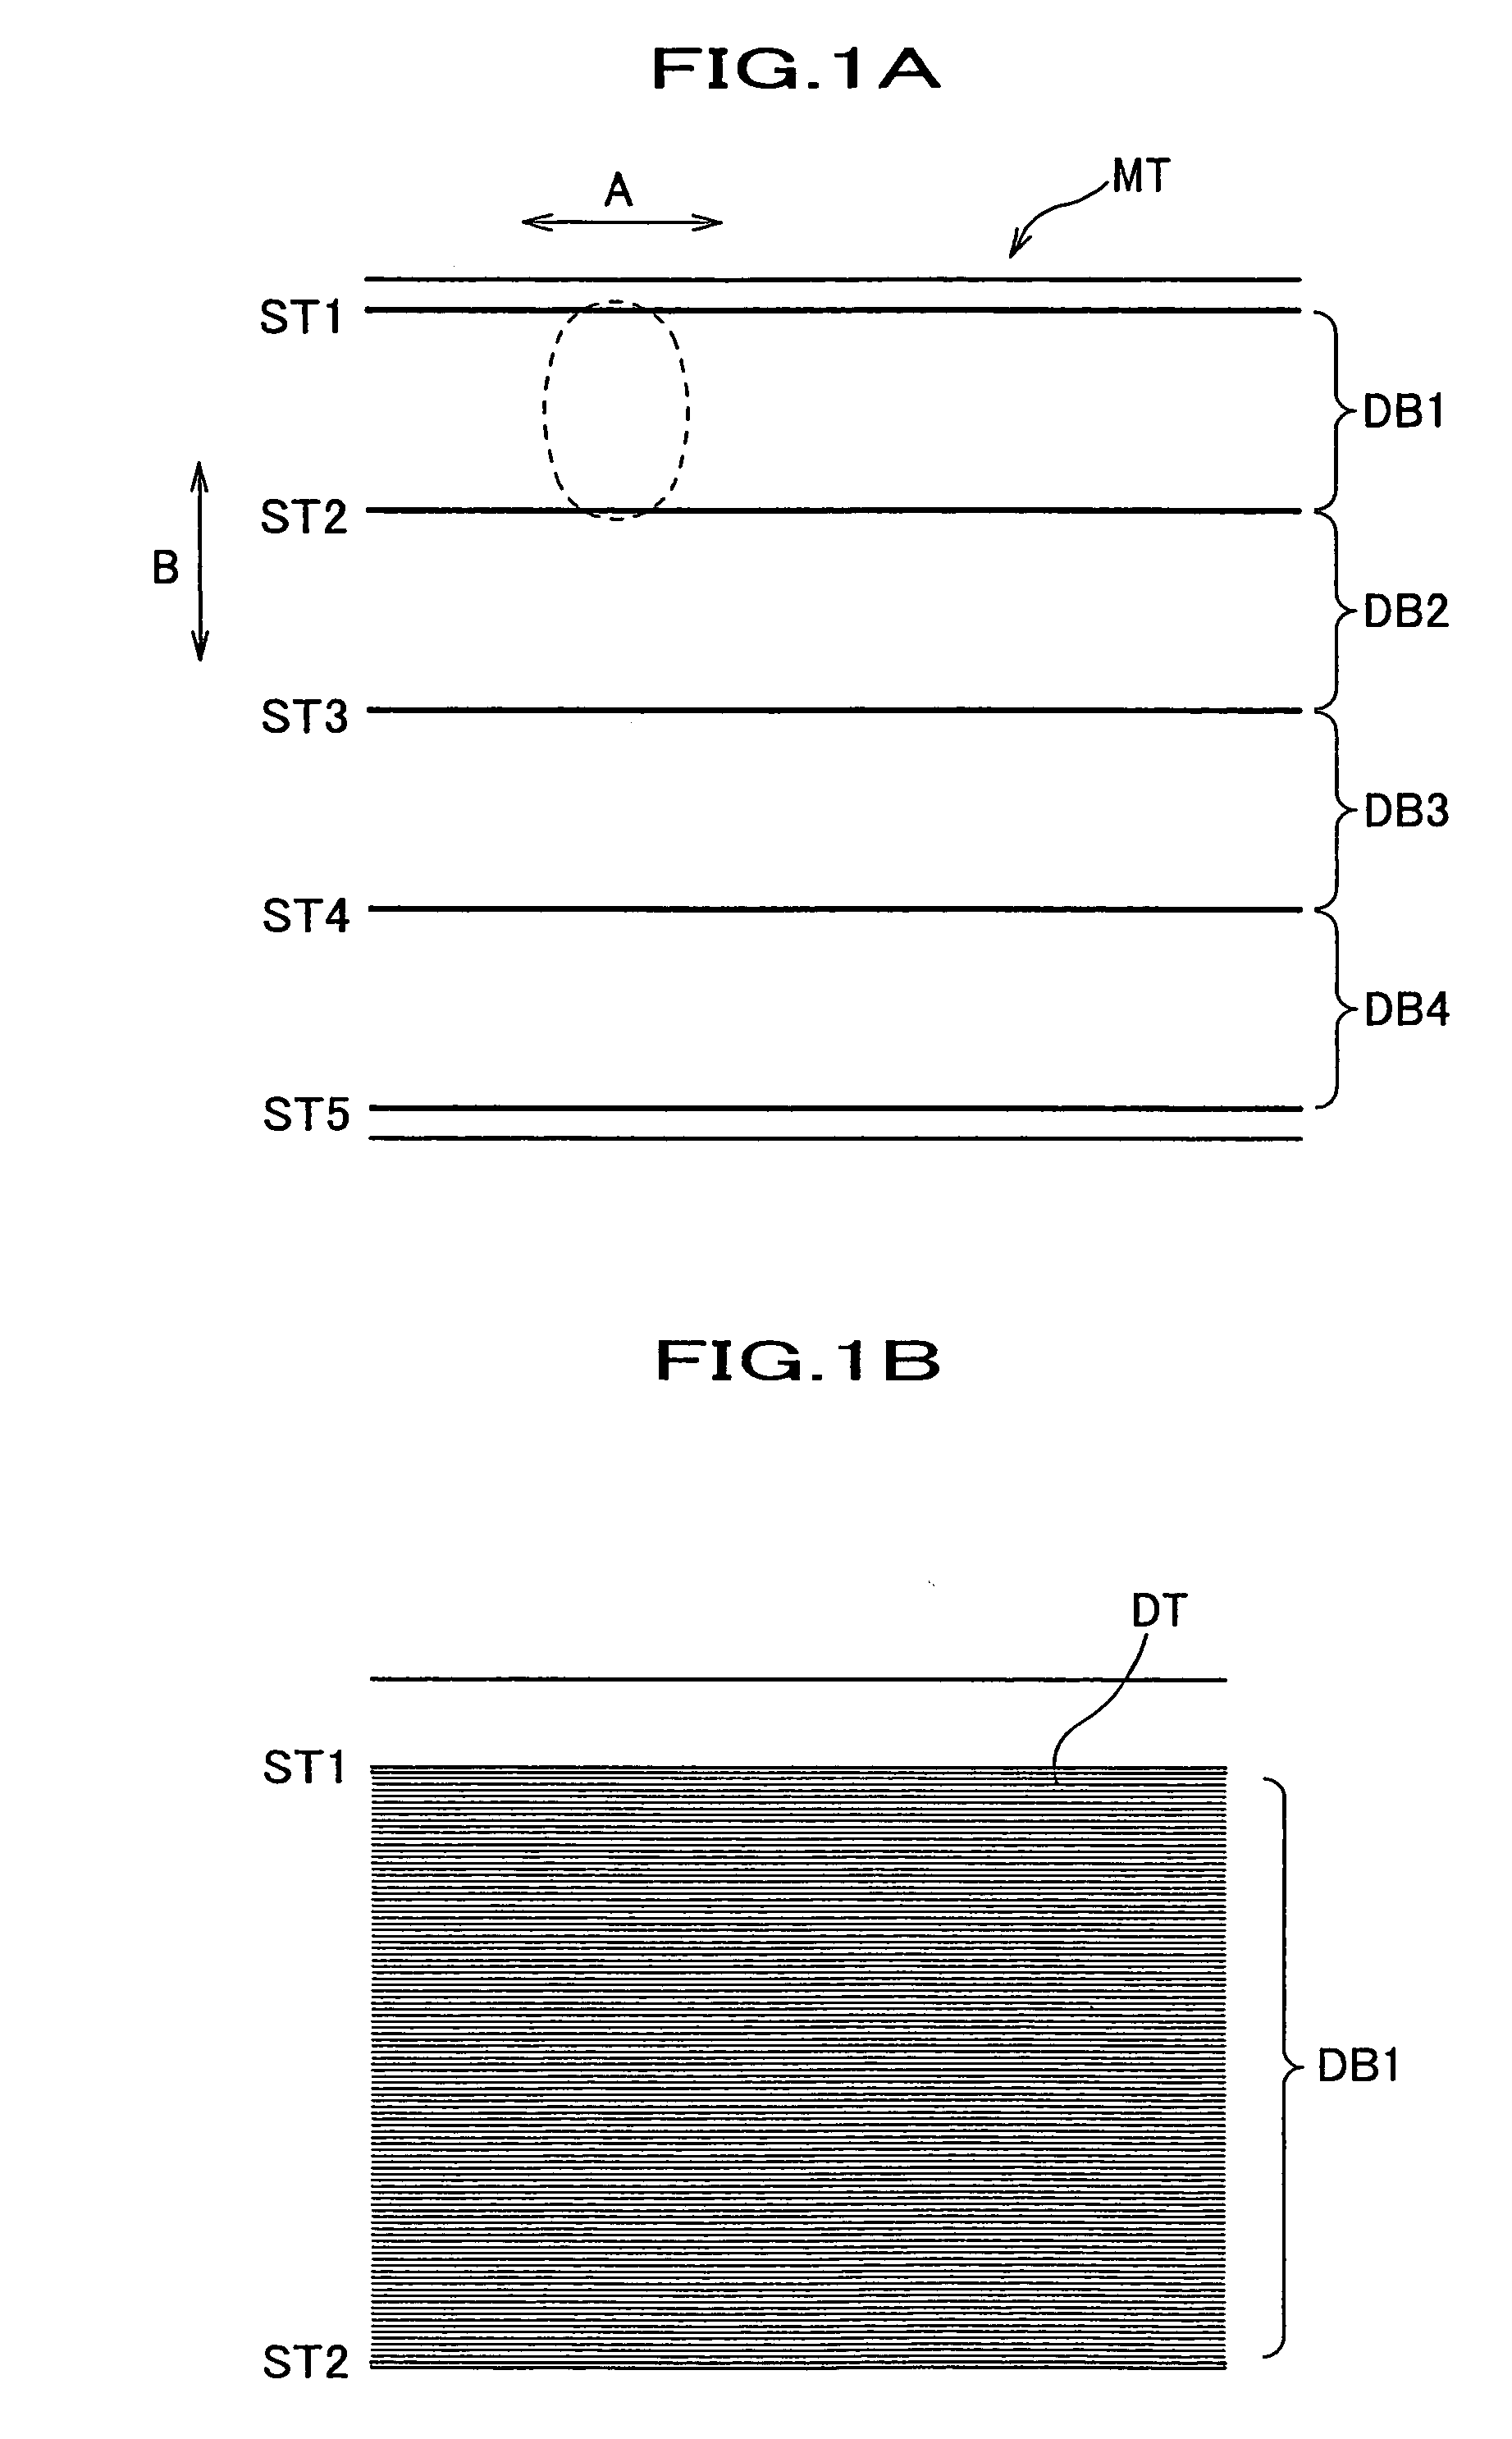 Magnetic tape drive with recording head group providing high density data signal recording